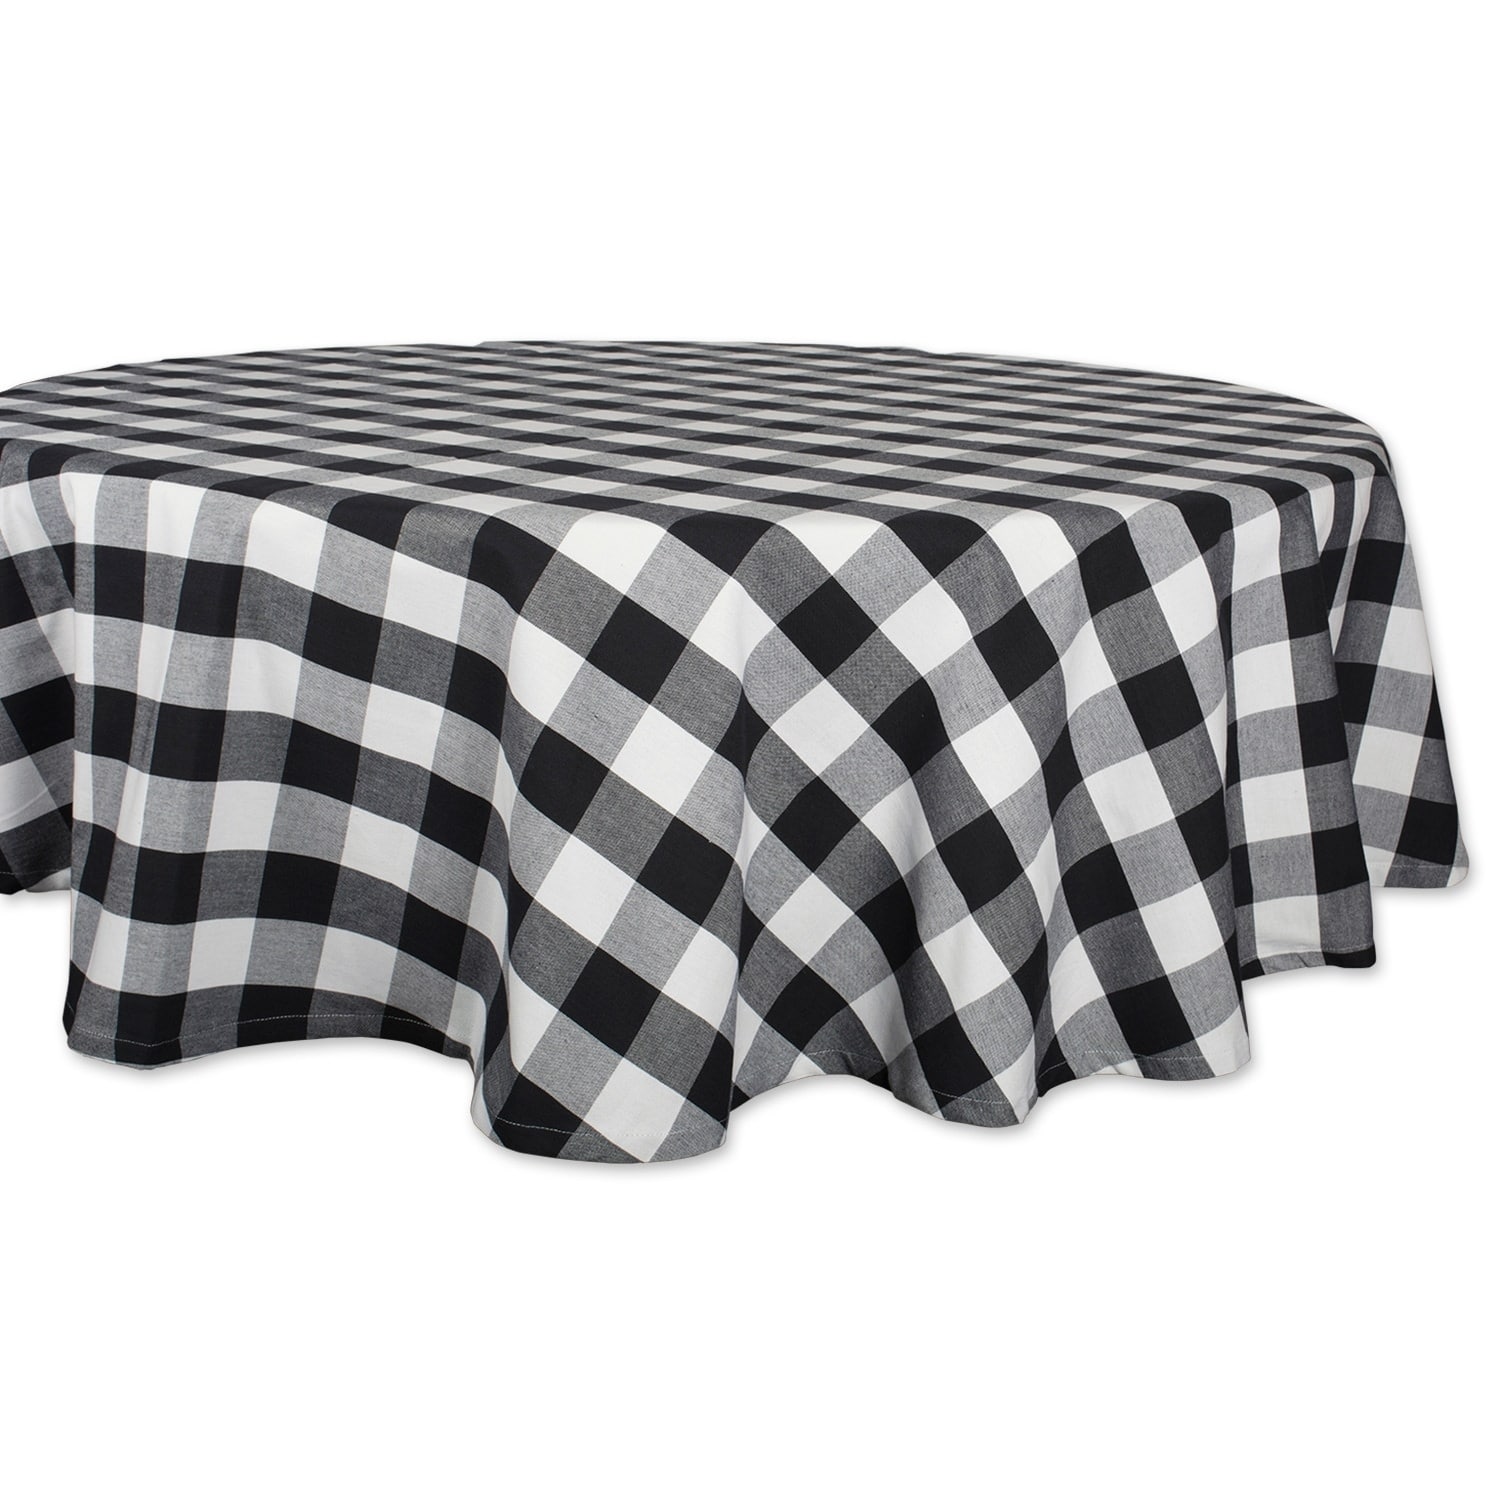 black and red tablecloth